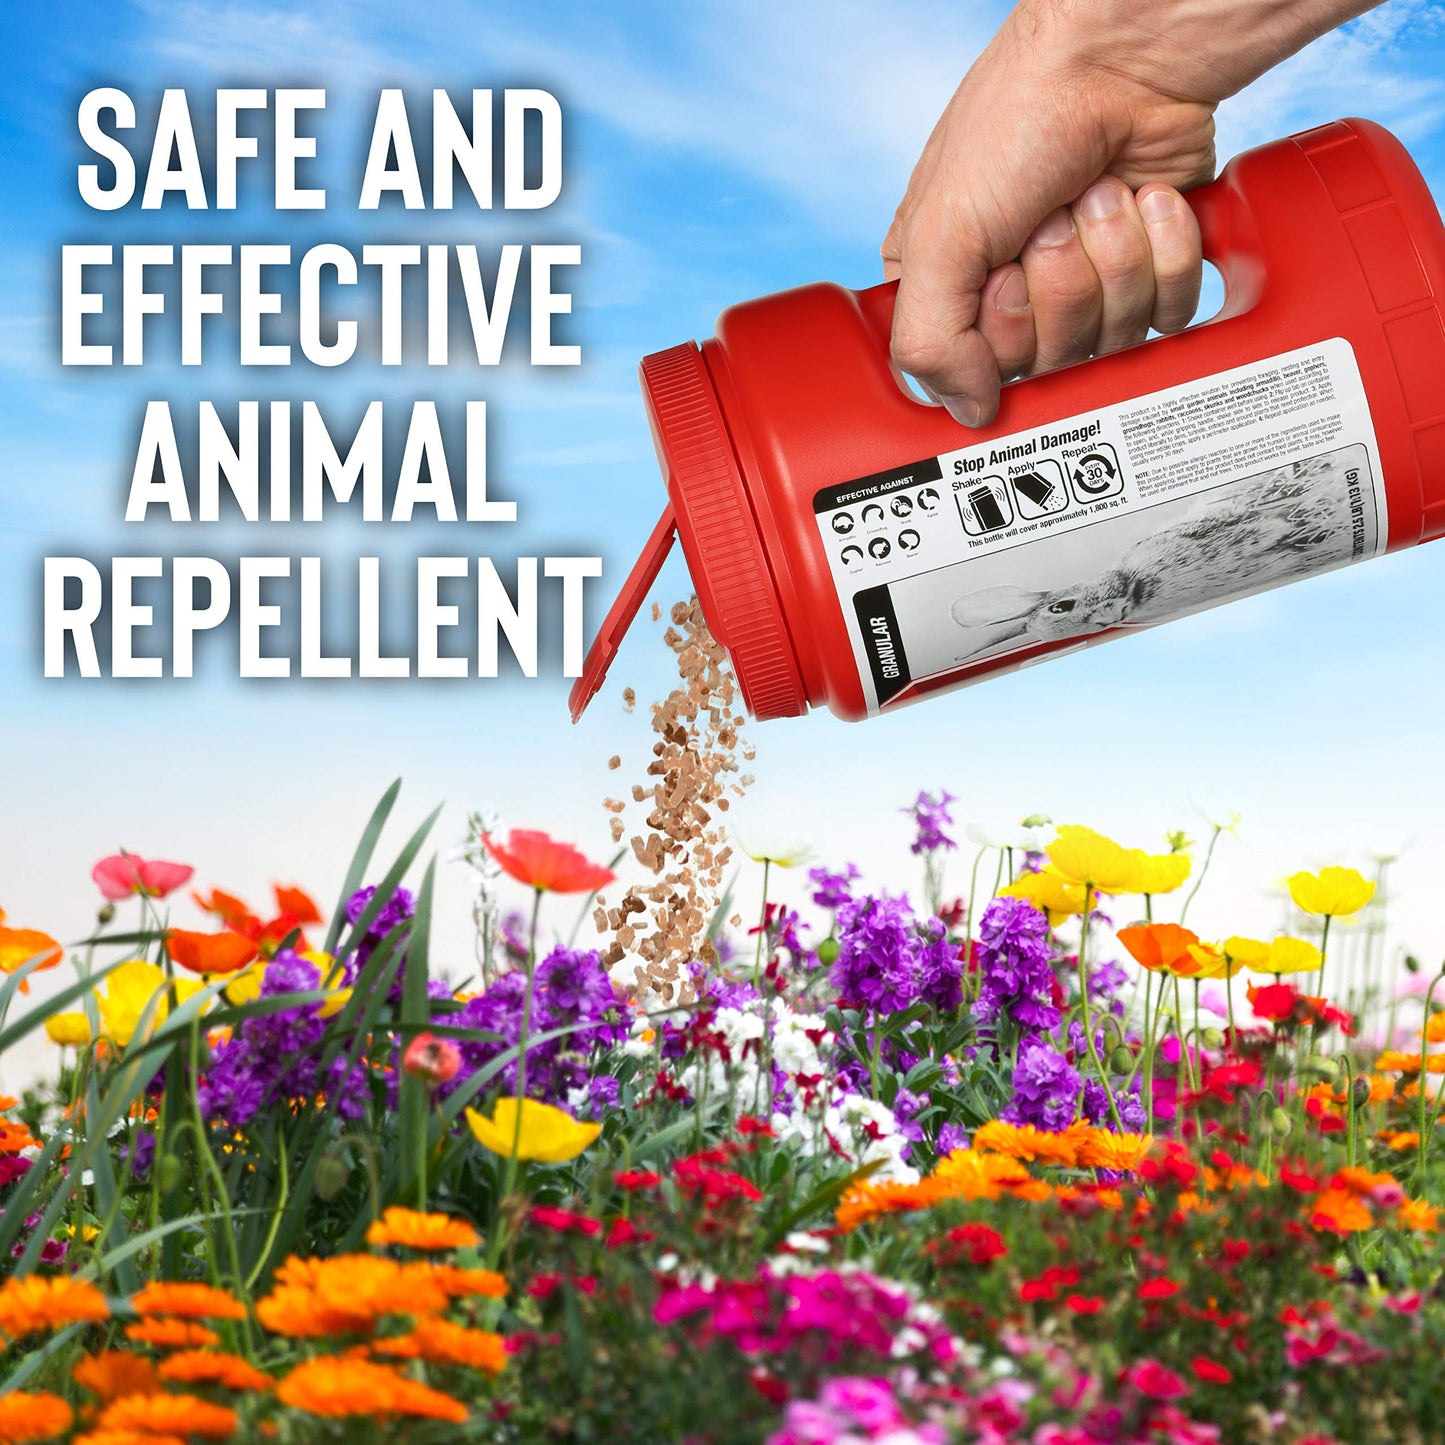 Reptile Stopper Granular Repellent - Safe & Effective, All Natural Food Grade Ingredients; Repels Snakes and Other Reptiles; Ready to Use, 2.5 lb Shaker Jug